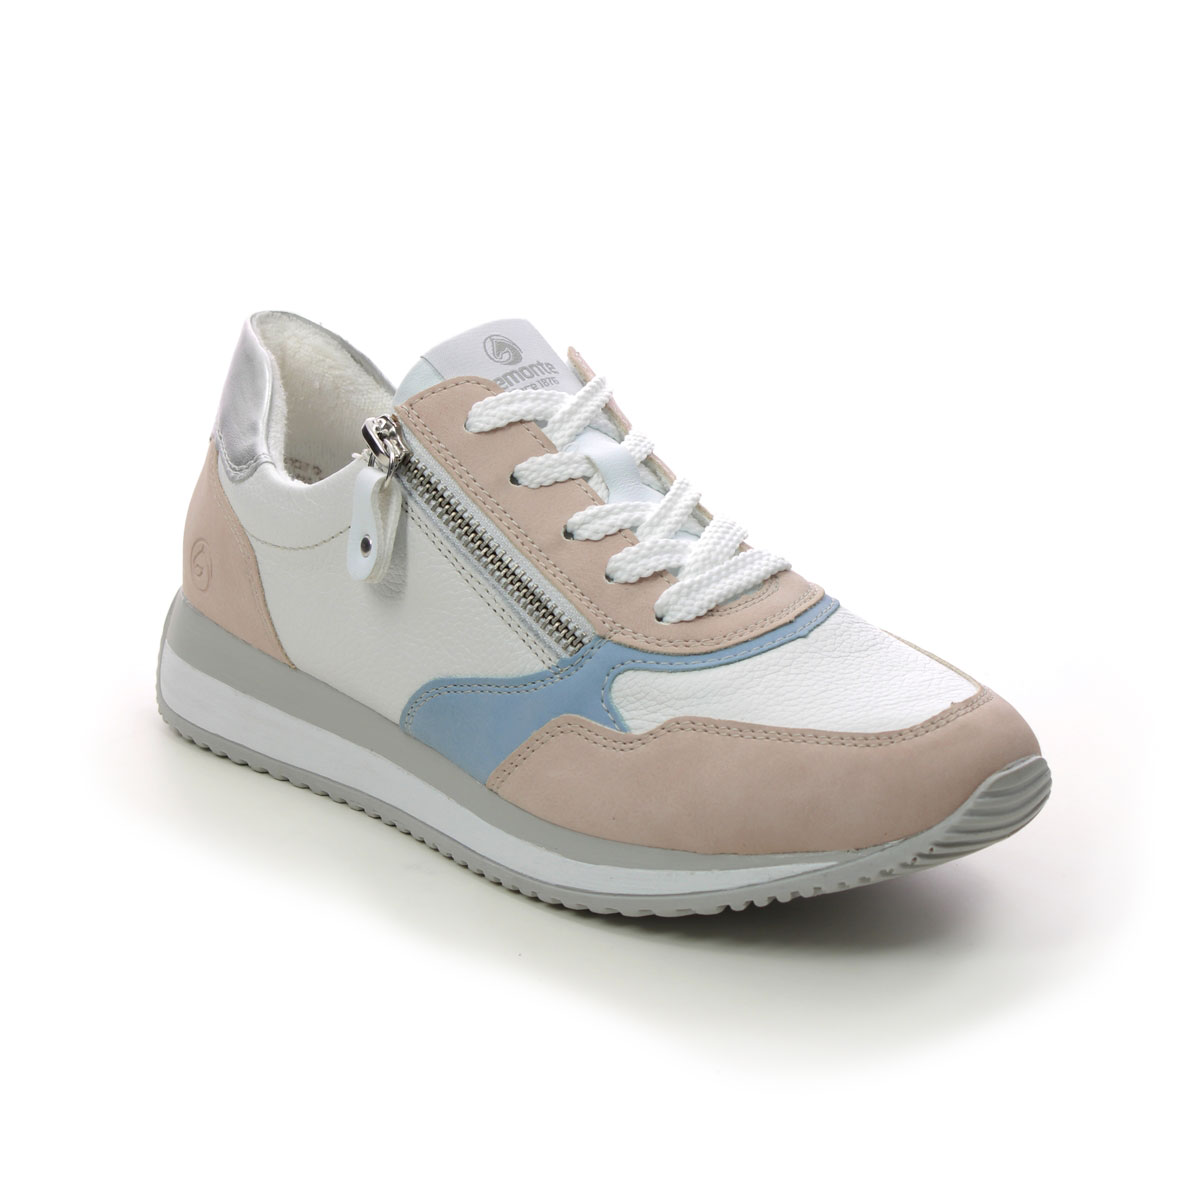 Remonte Vapod Zip White Blue Pink Womens Trainers D0H01-80 In Size 42 In Plain White Blue Pink